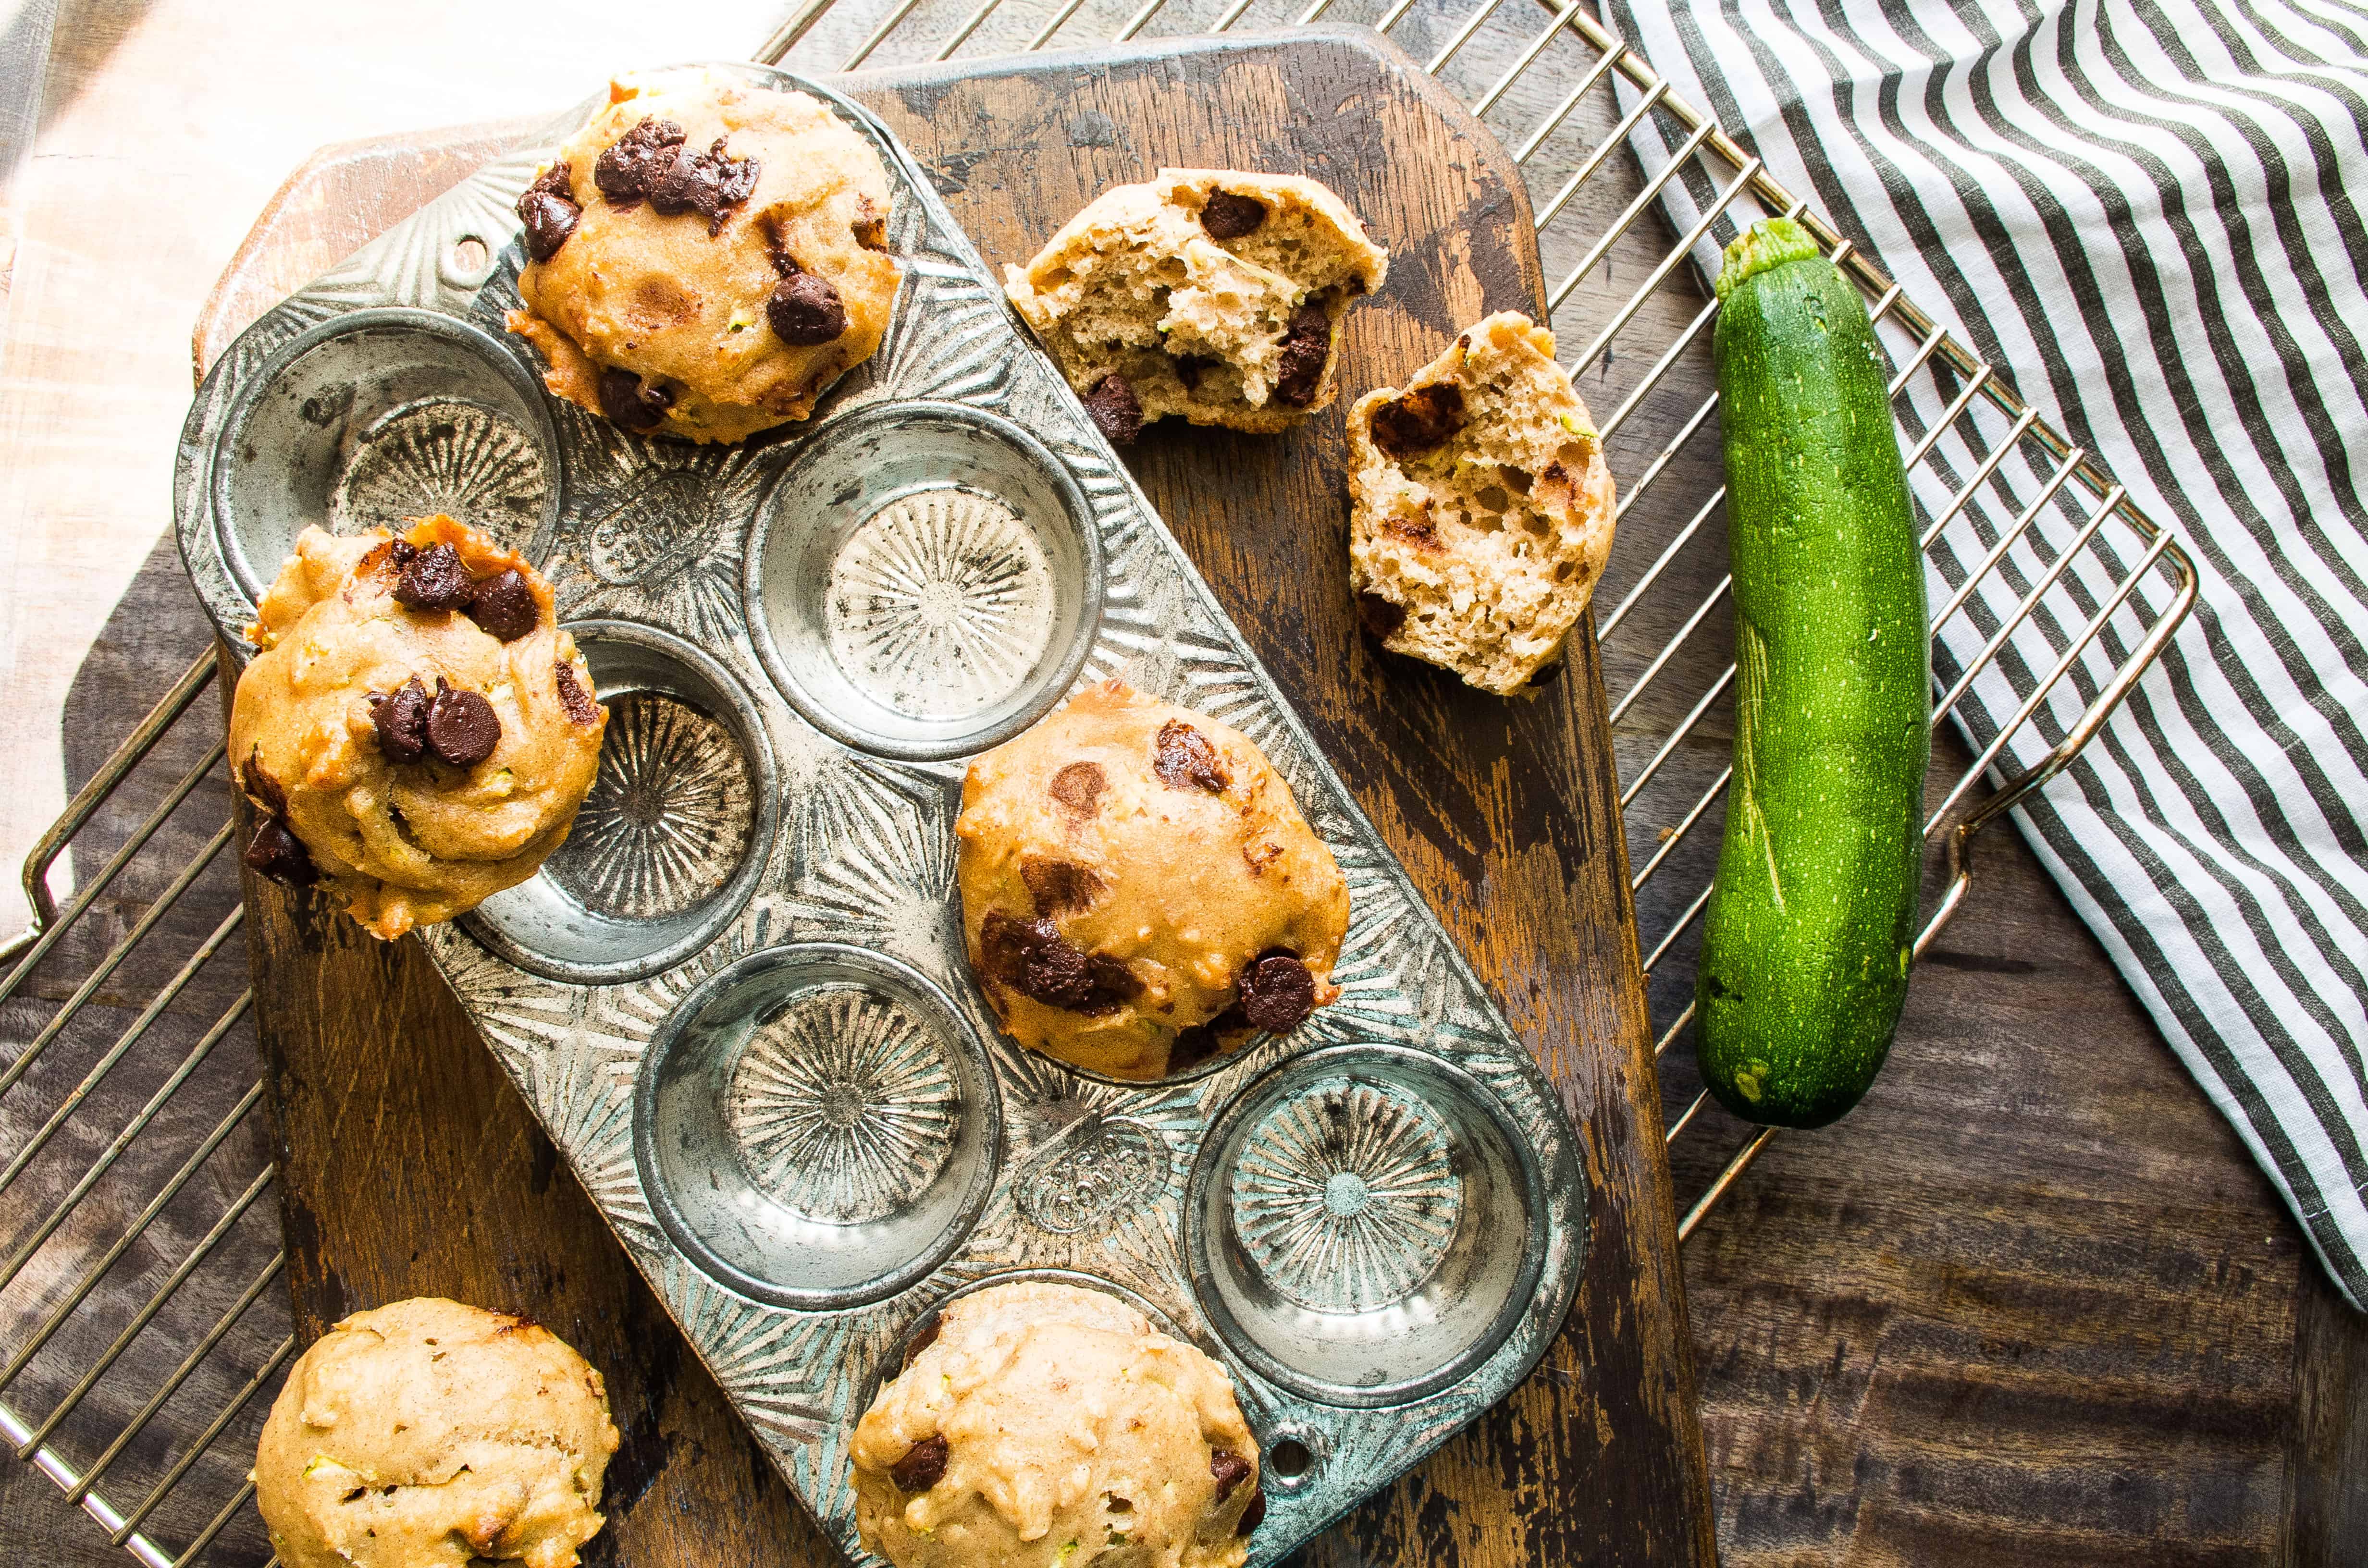 Chocolate Chip Zucchini Spice Muffins- Easy whole wheat muffins with zucchini that make for healthy after school snacks or a quick breakfast on the go!|thekitcheneer.com